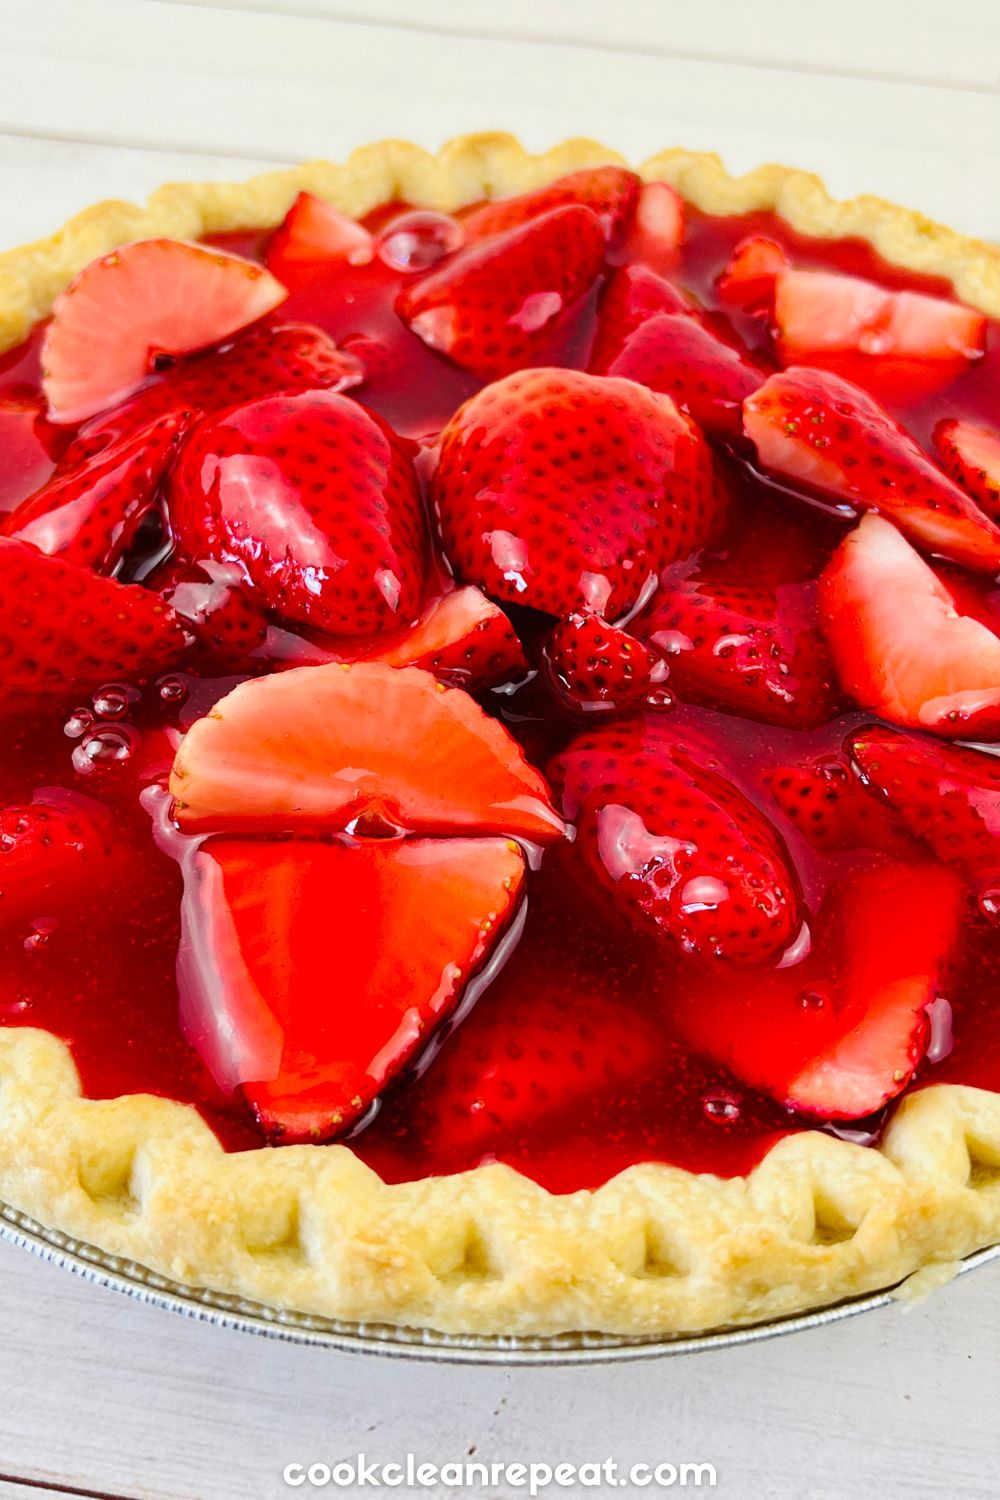 fresh cut strawberries in a pie crust with jello poured on top